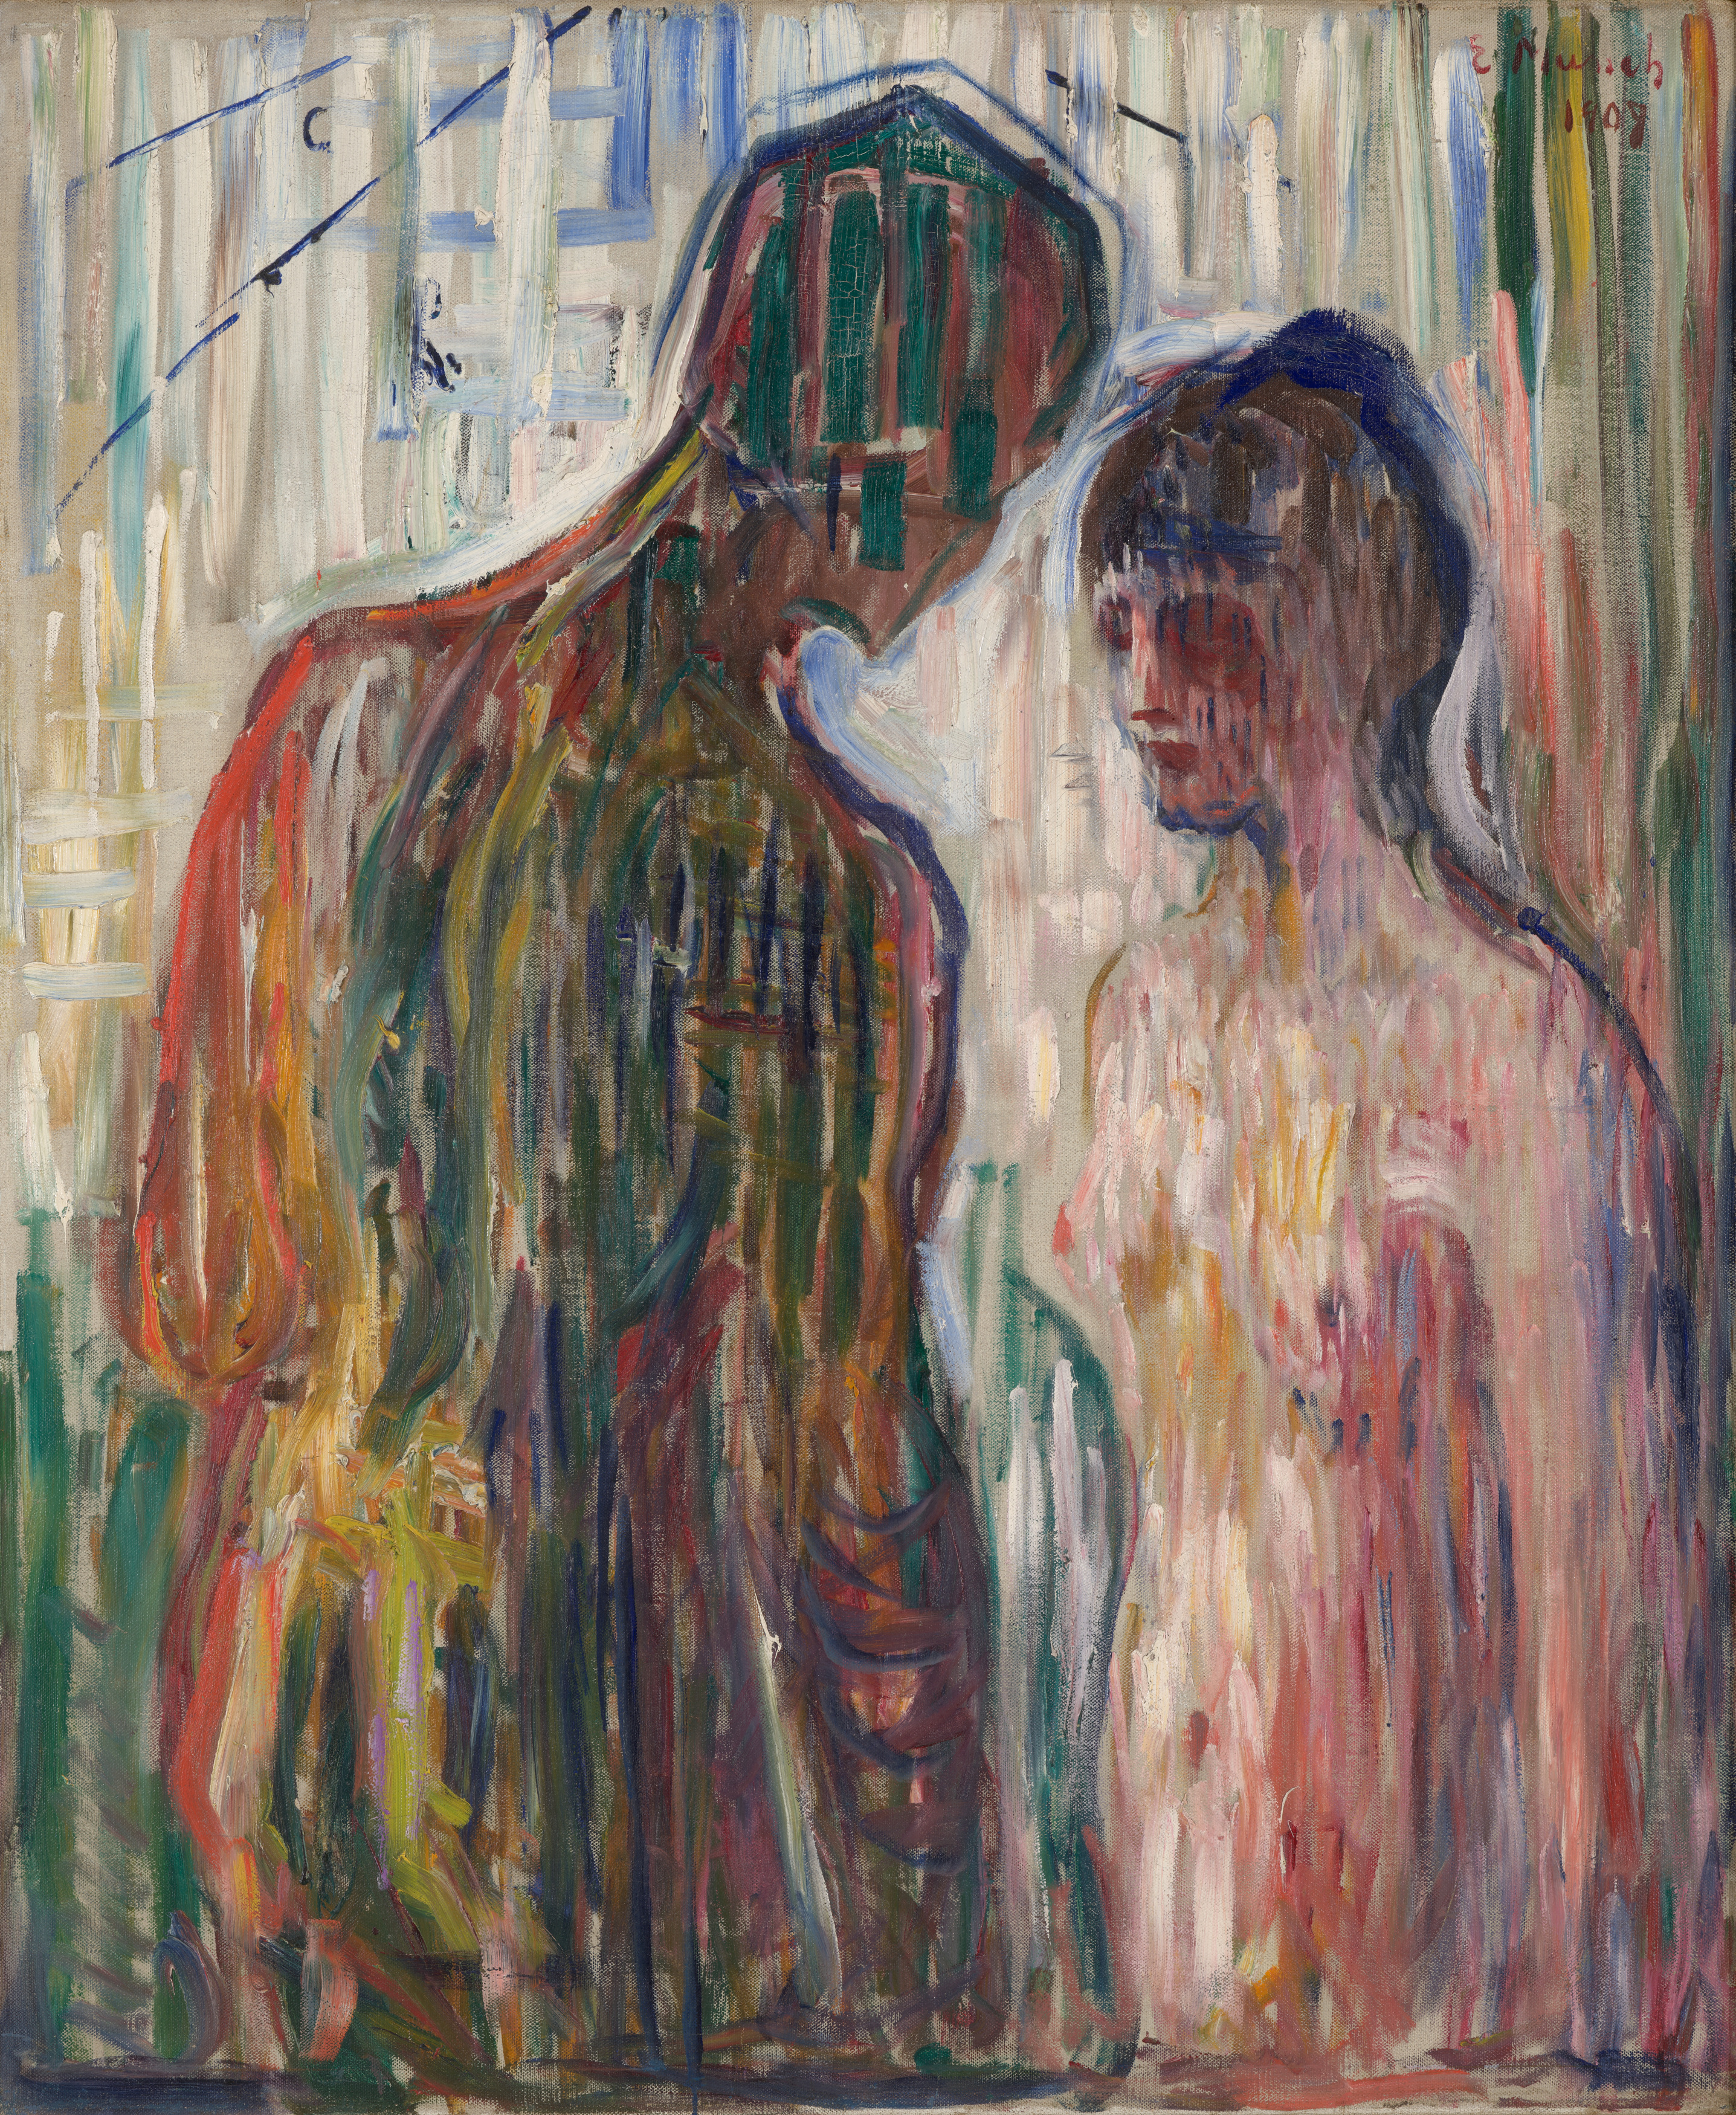 Edvard Munch: Cupid and Psyche. Oil on canvas, 1907. Photo © Munchmuseet